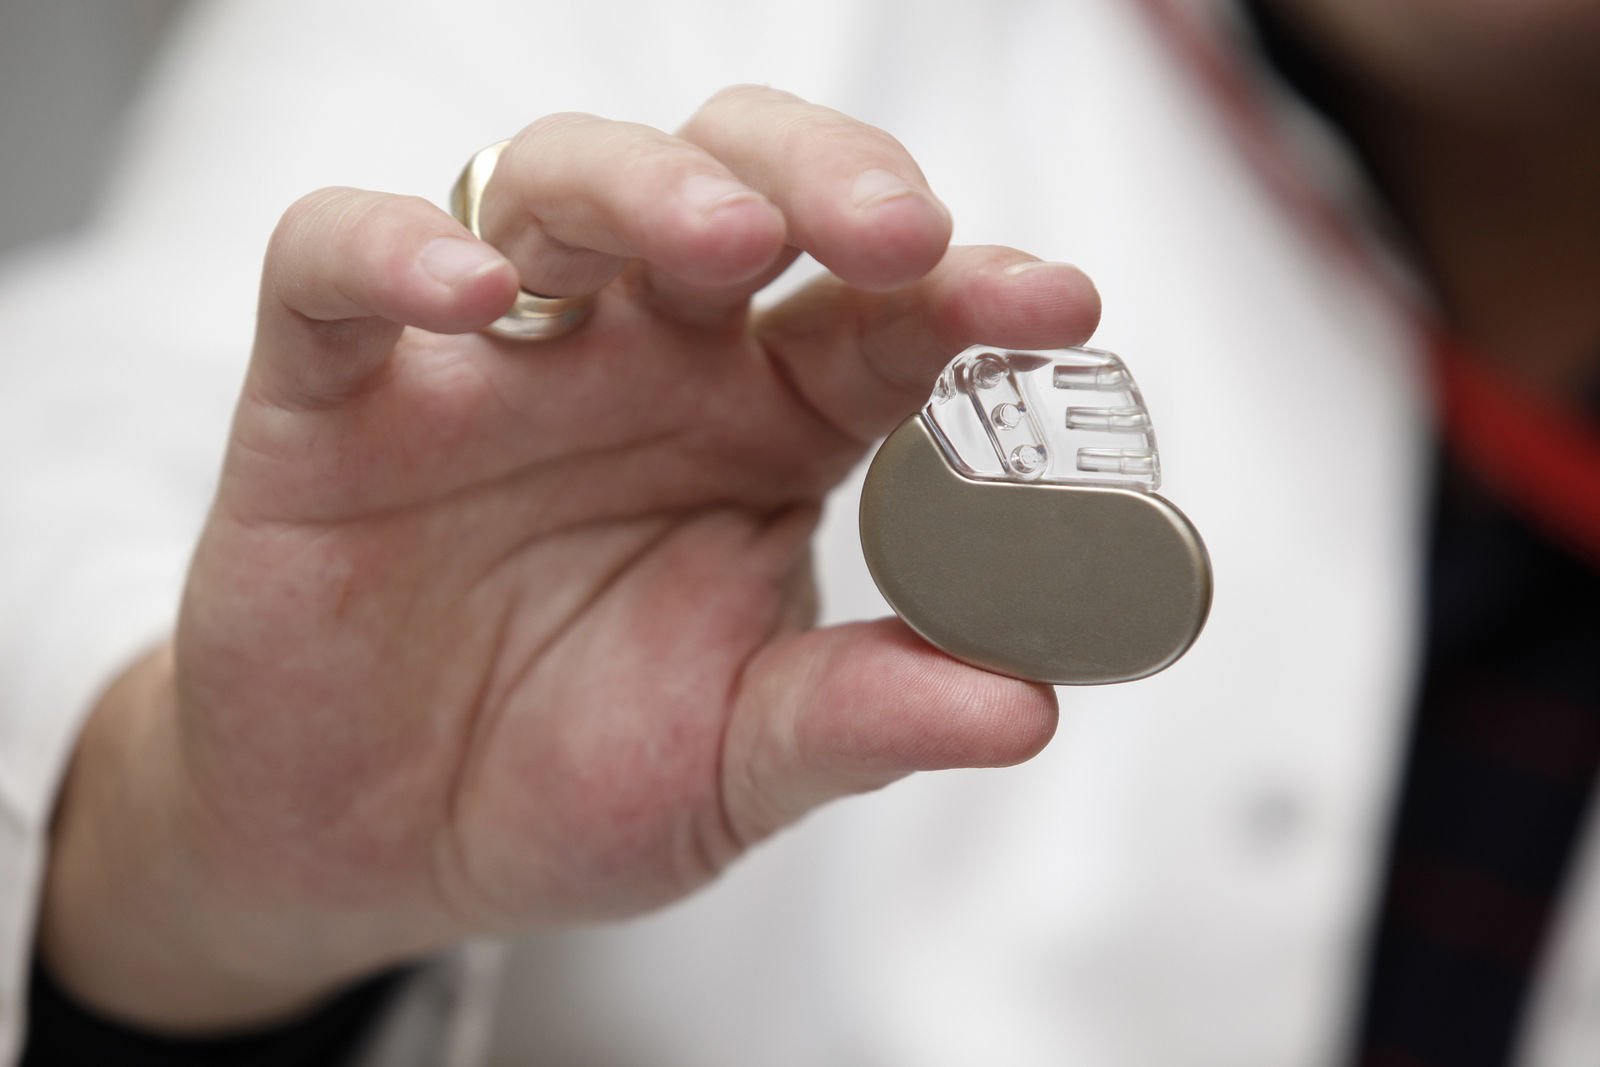 How much does a pacemaker affect car insurance rates?